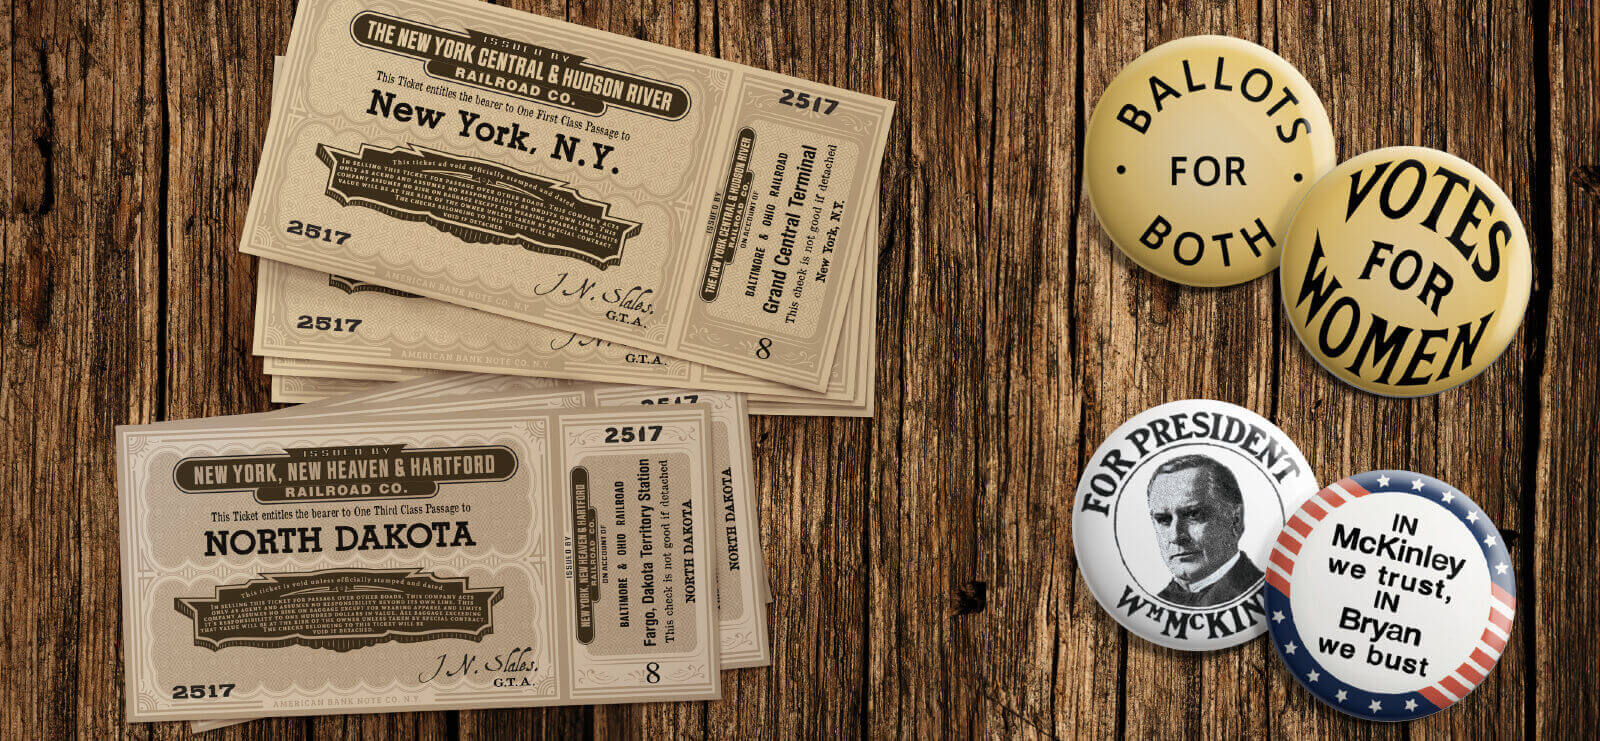 The Alienist - Train tickets and political pins